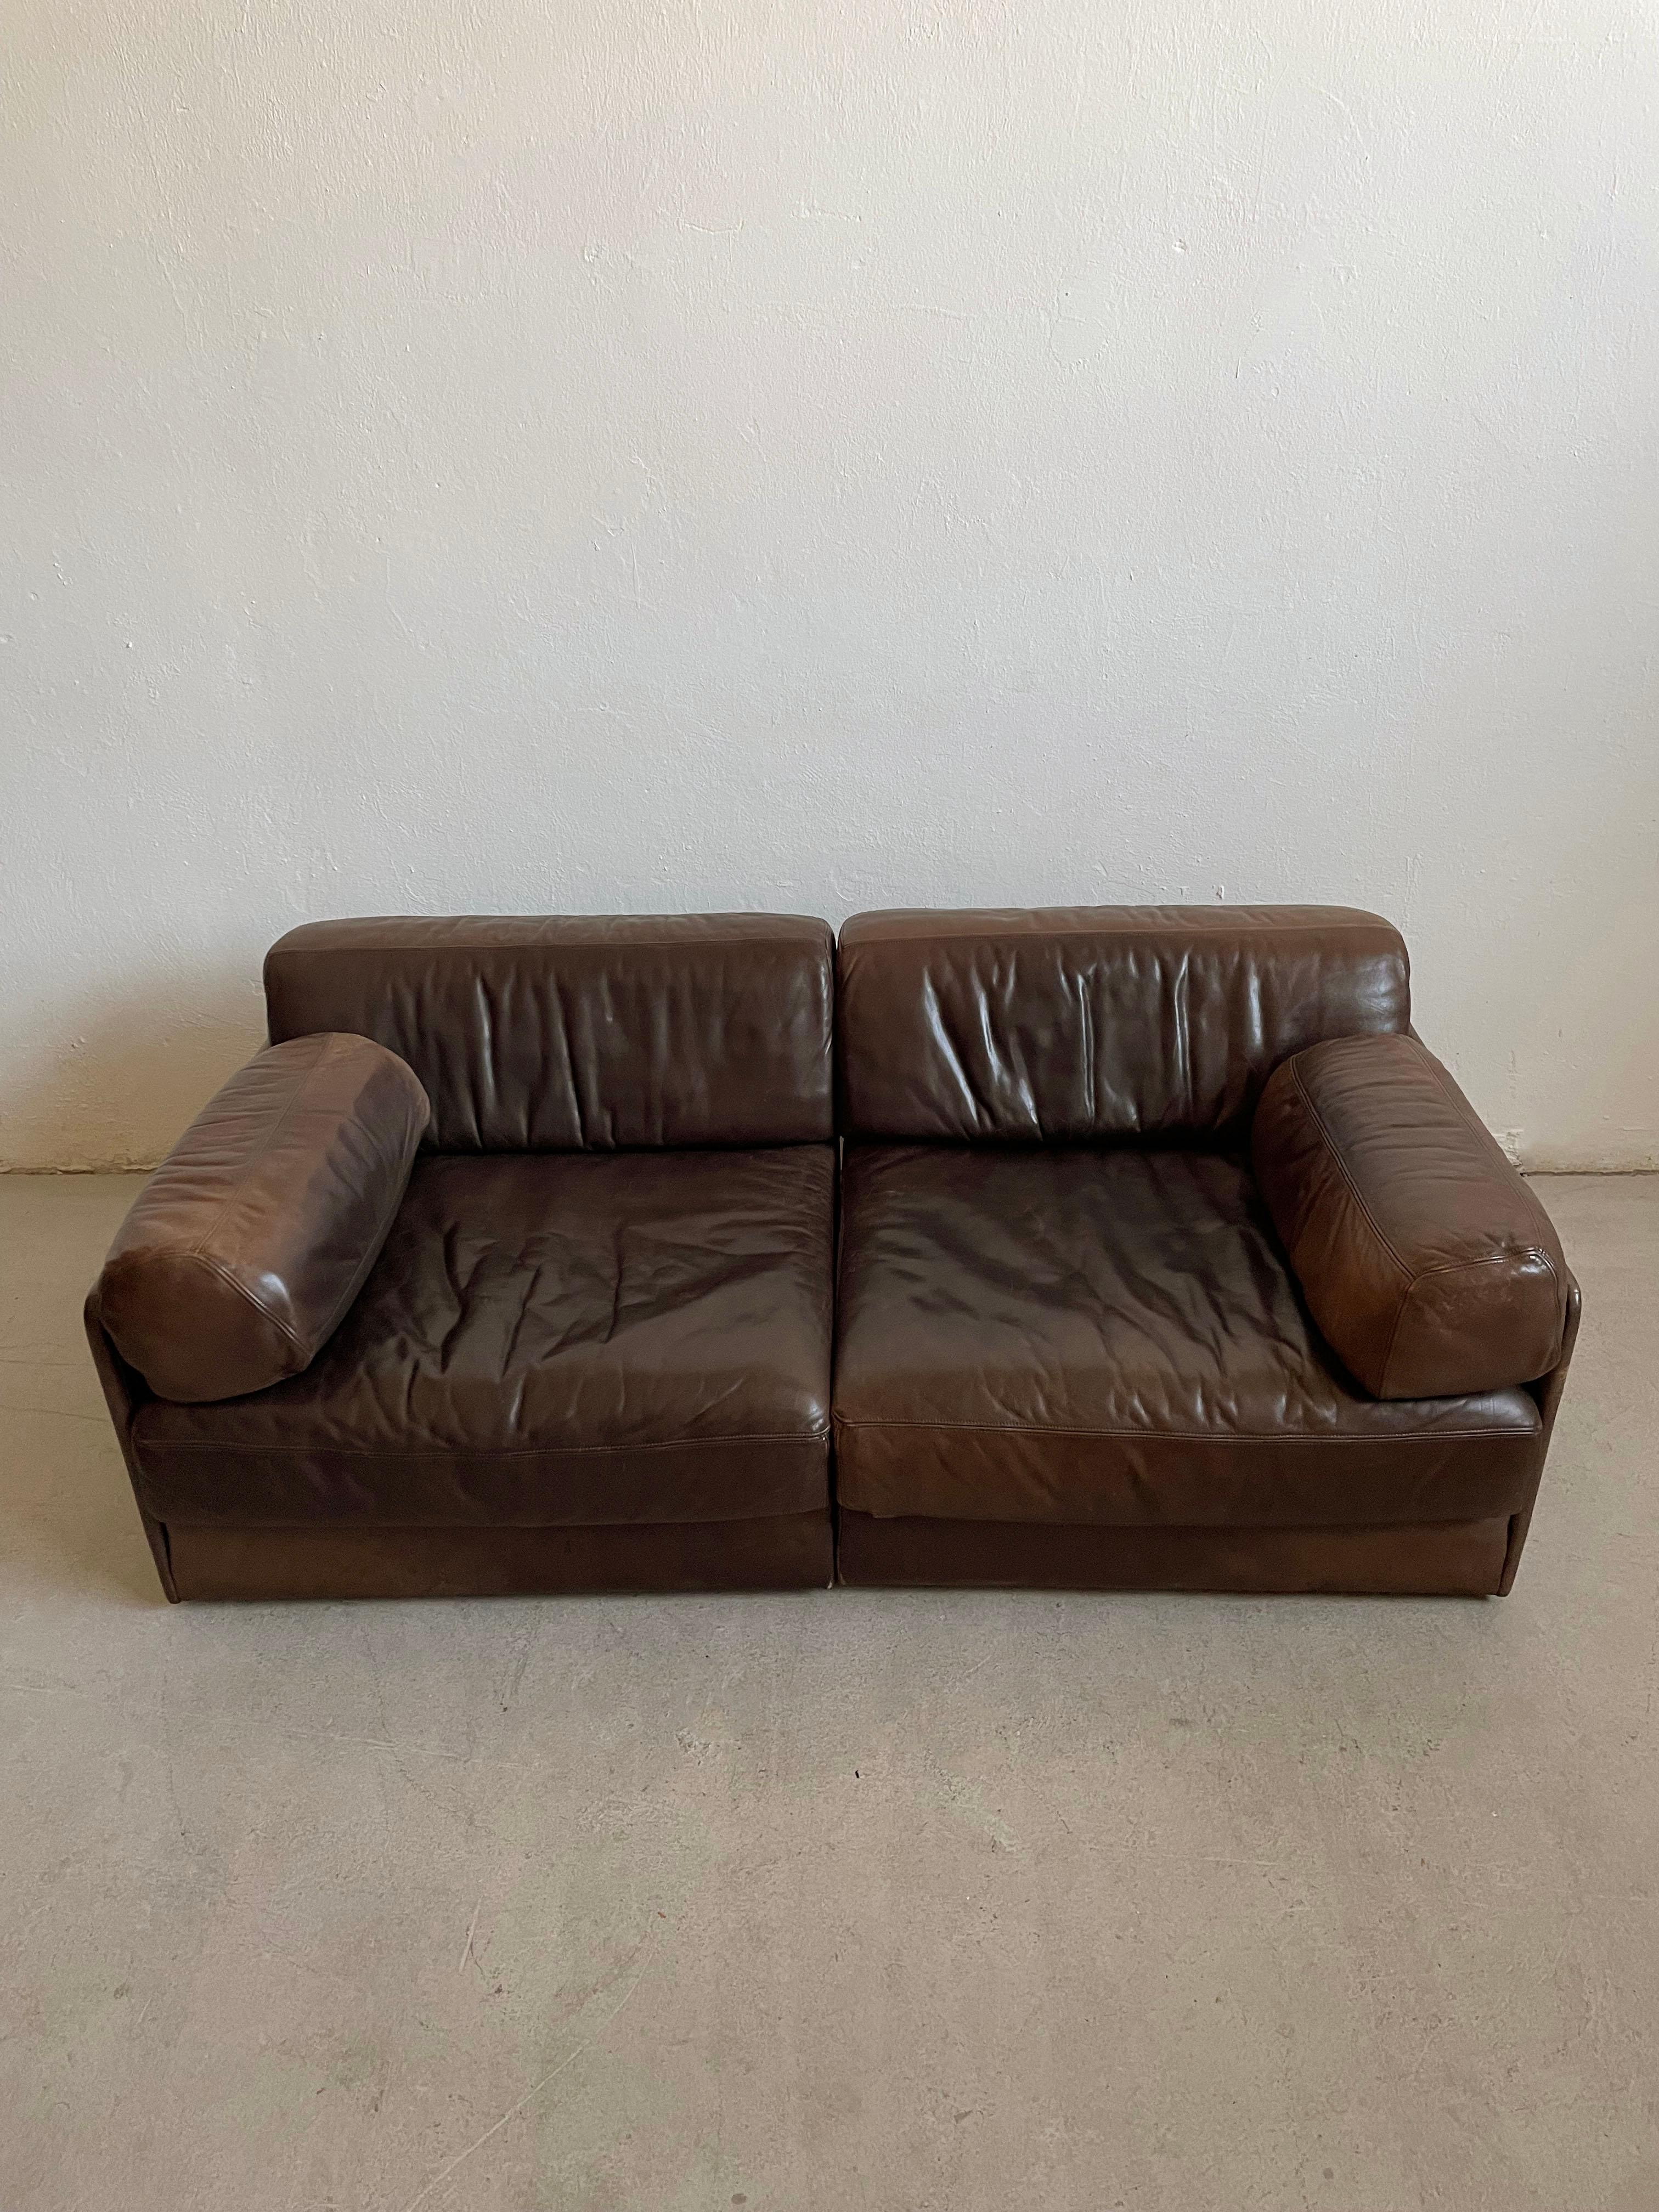 Mid-Century Modern Mid-Century De Sede Ds 76 Modular Sofa Bed, 2-piece Brown Leather Modules, 1970s For Sale